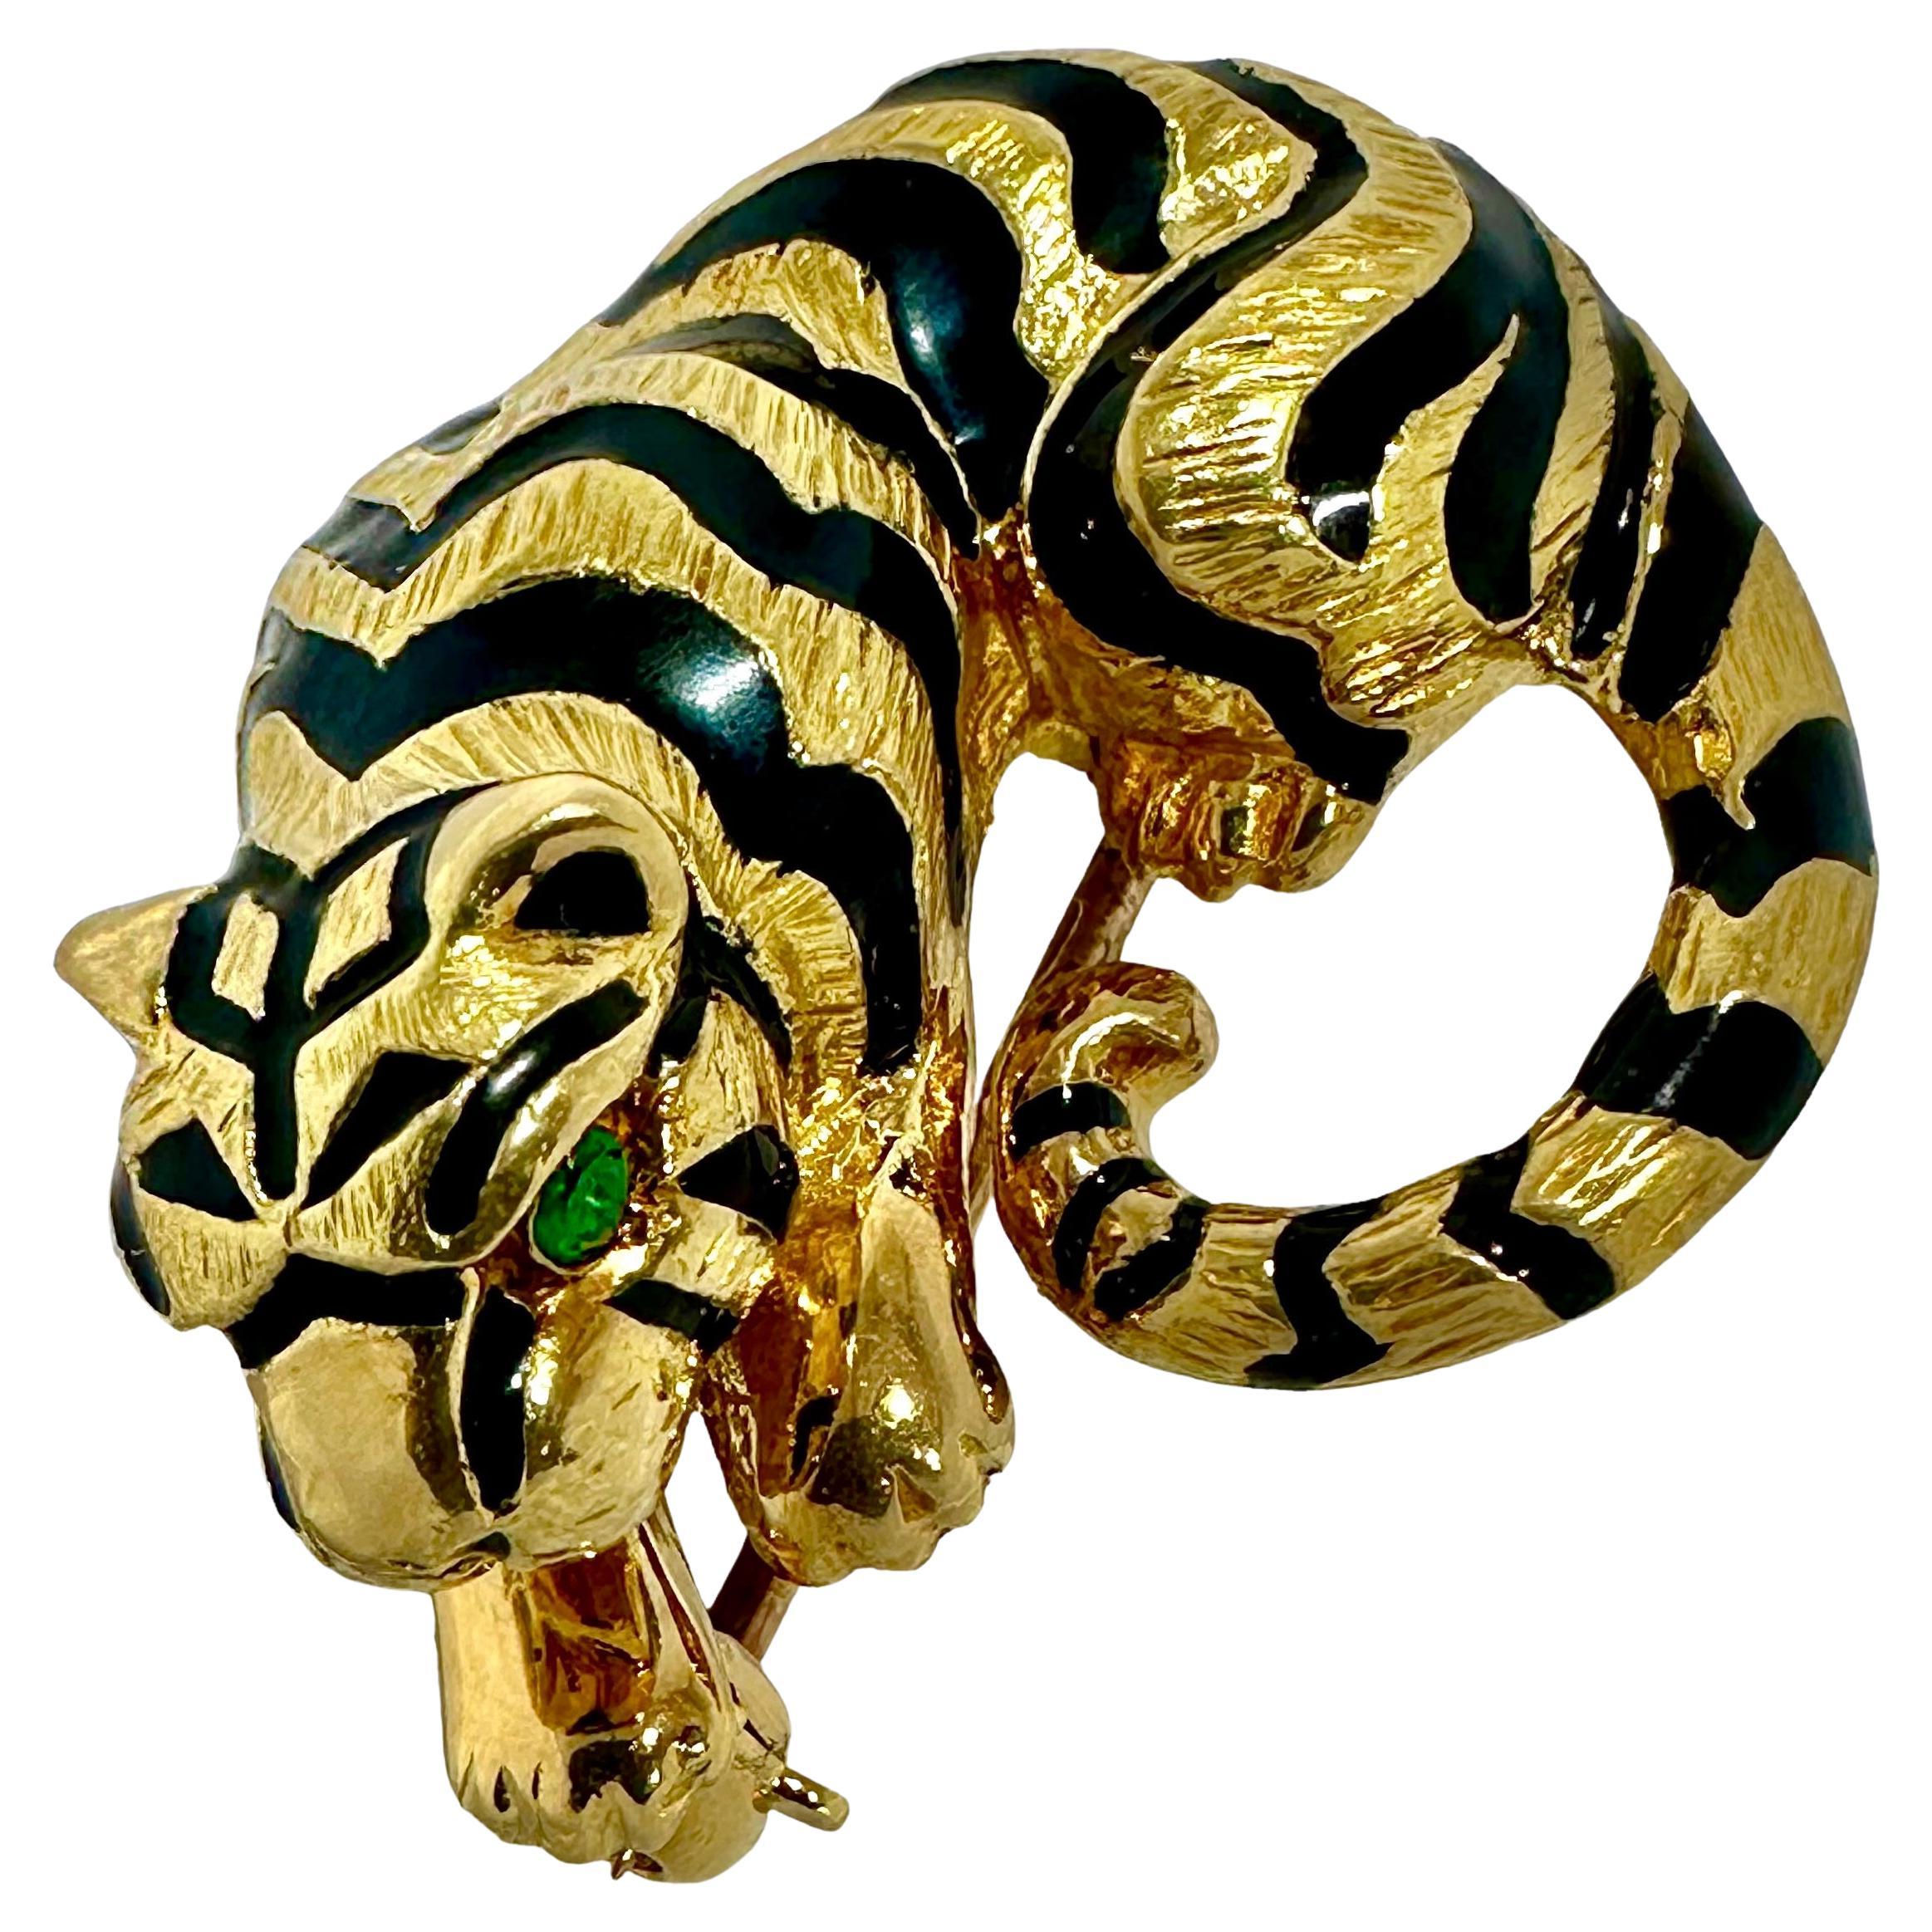 Diminutive, Lifelike, Yellow Gold Tiger Brooch with Enamel & Bright Emerald Eyes For Sale